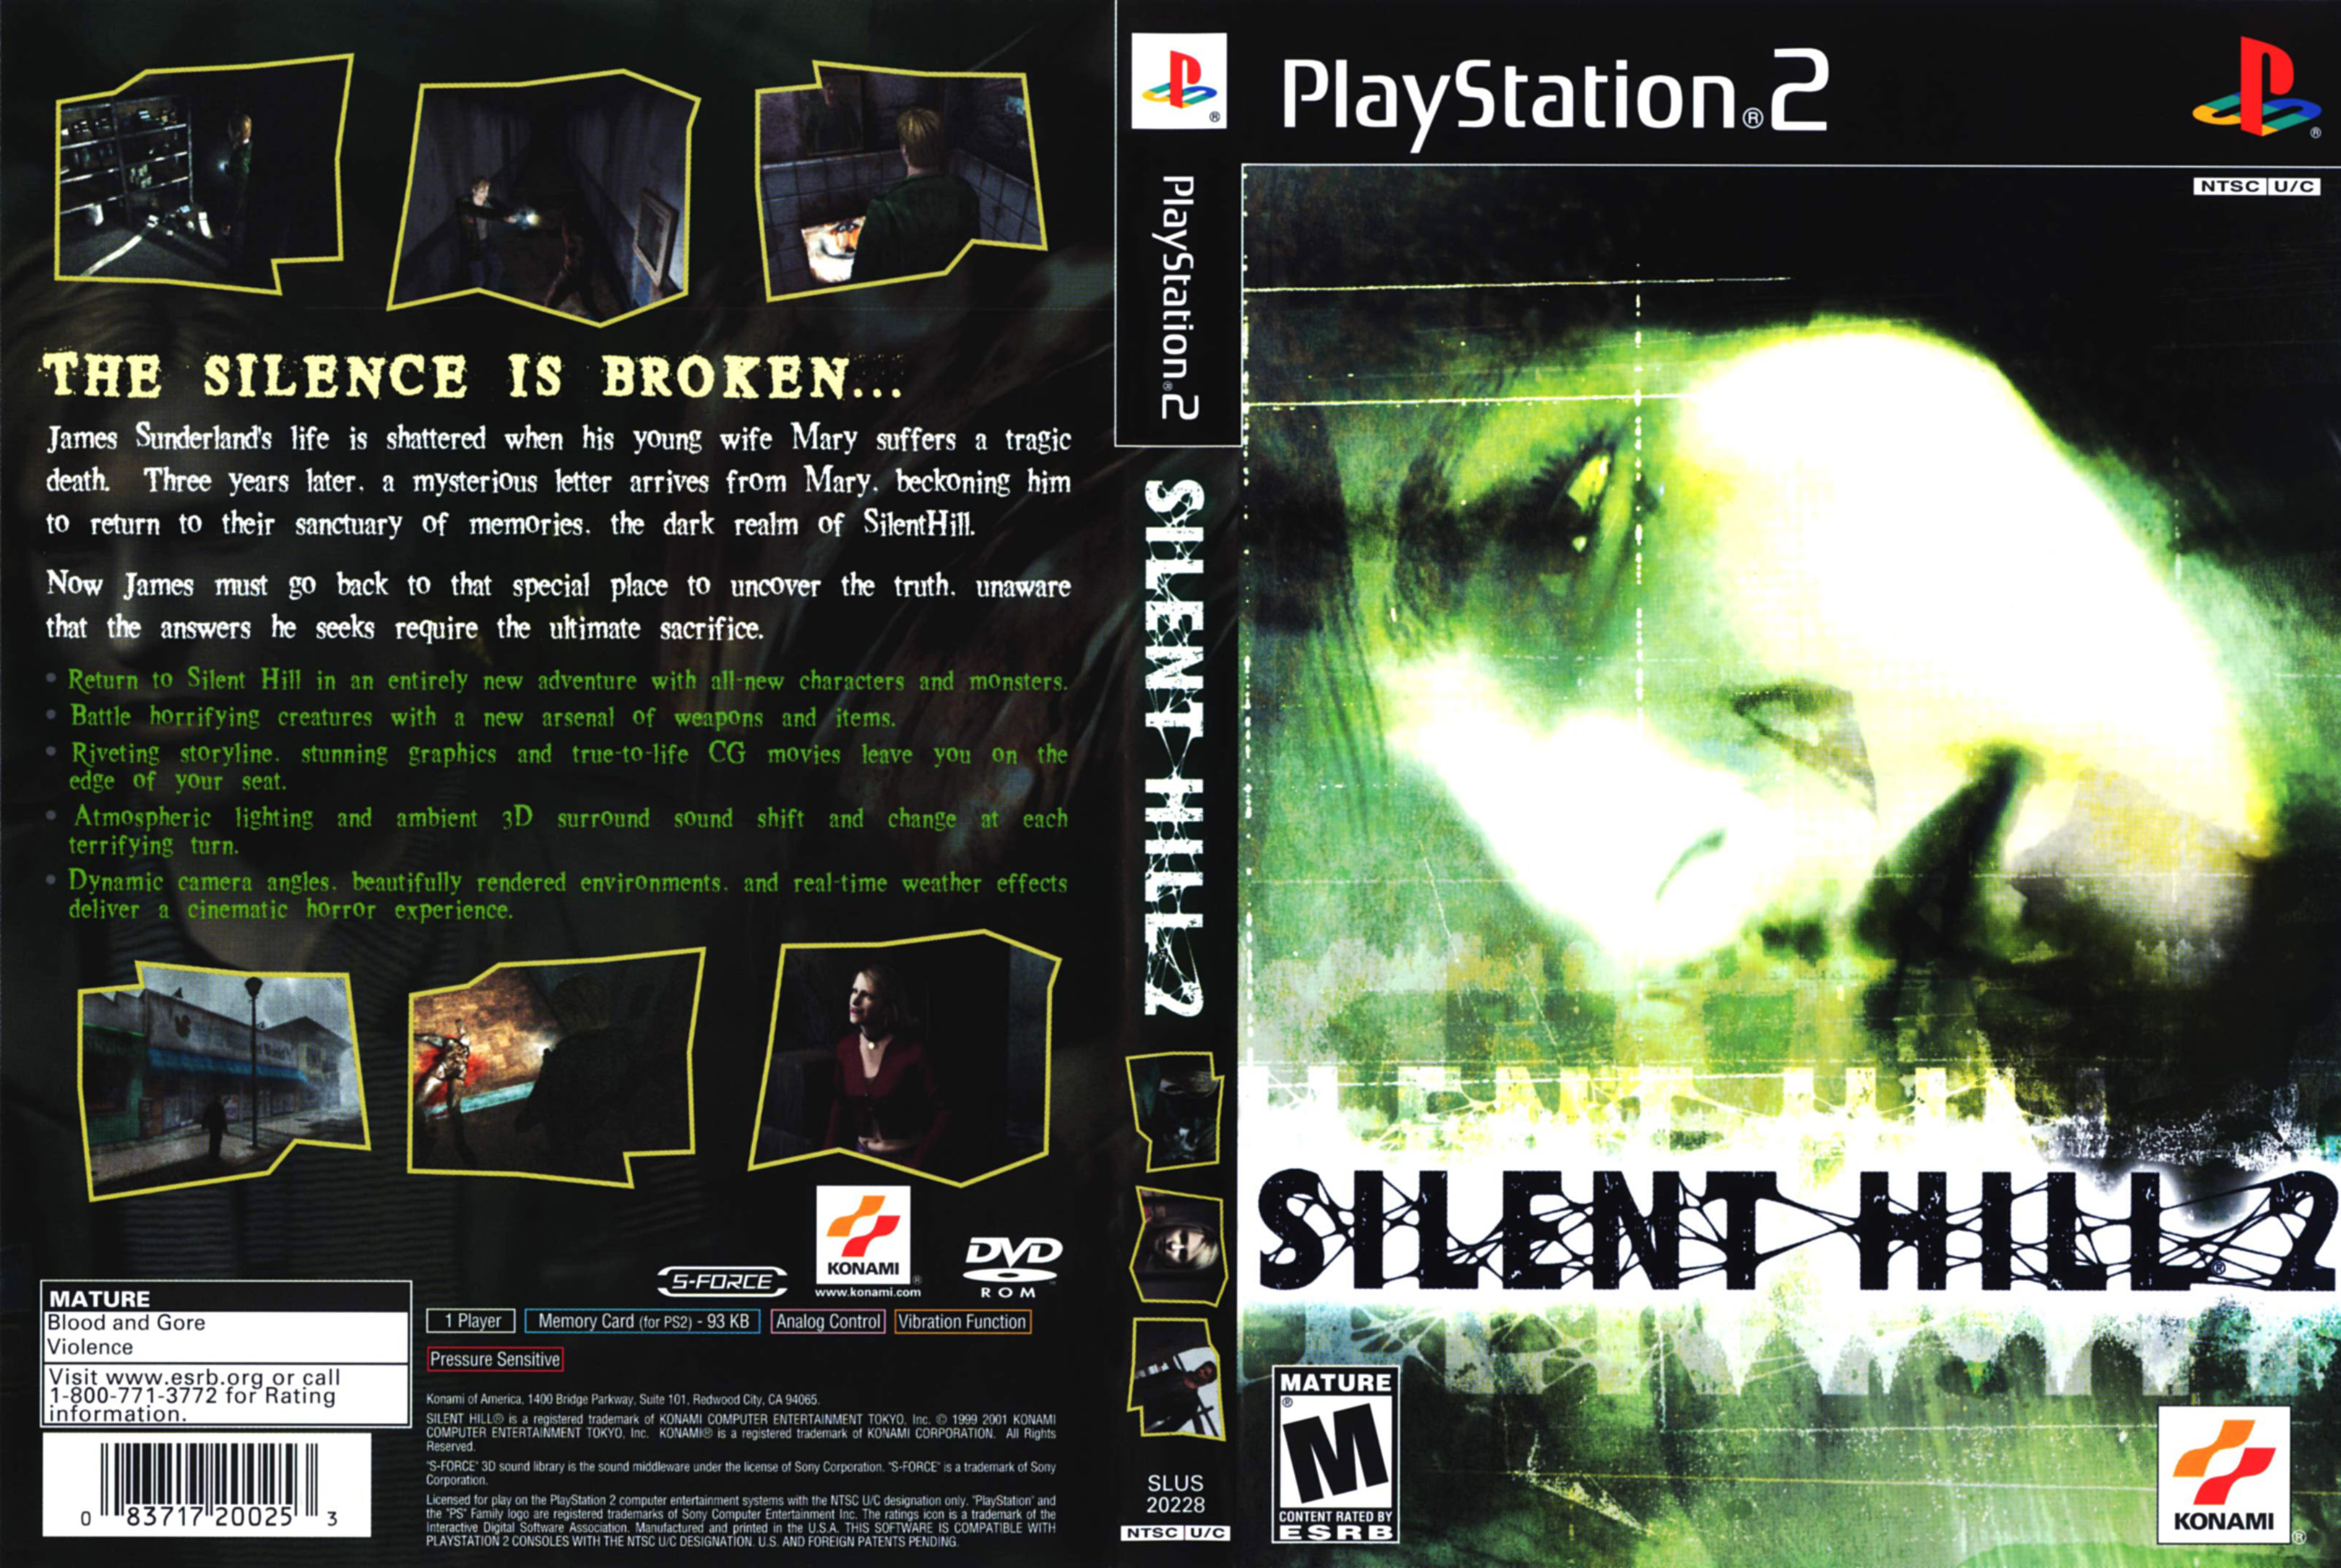 download silent hill 2 book of lost memories for free